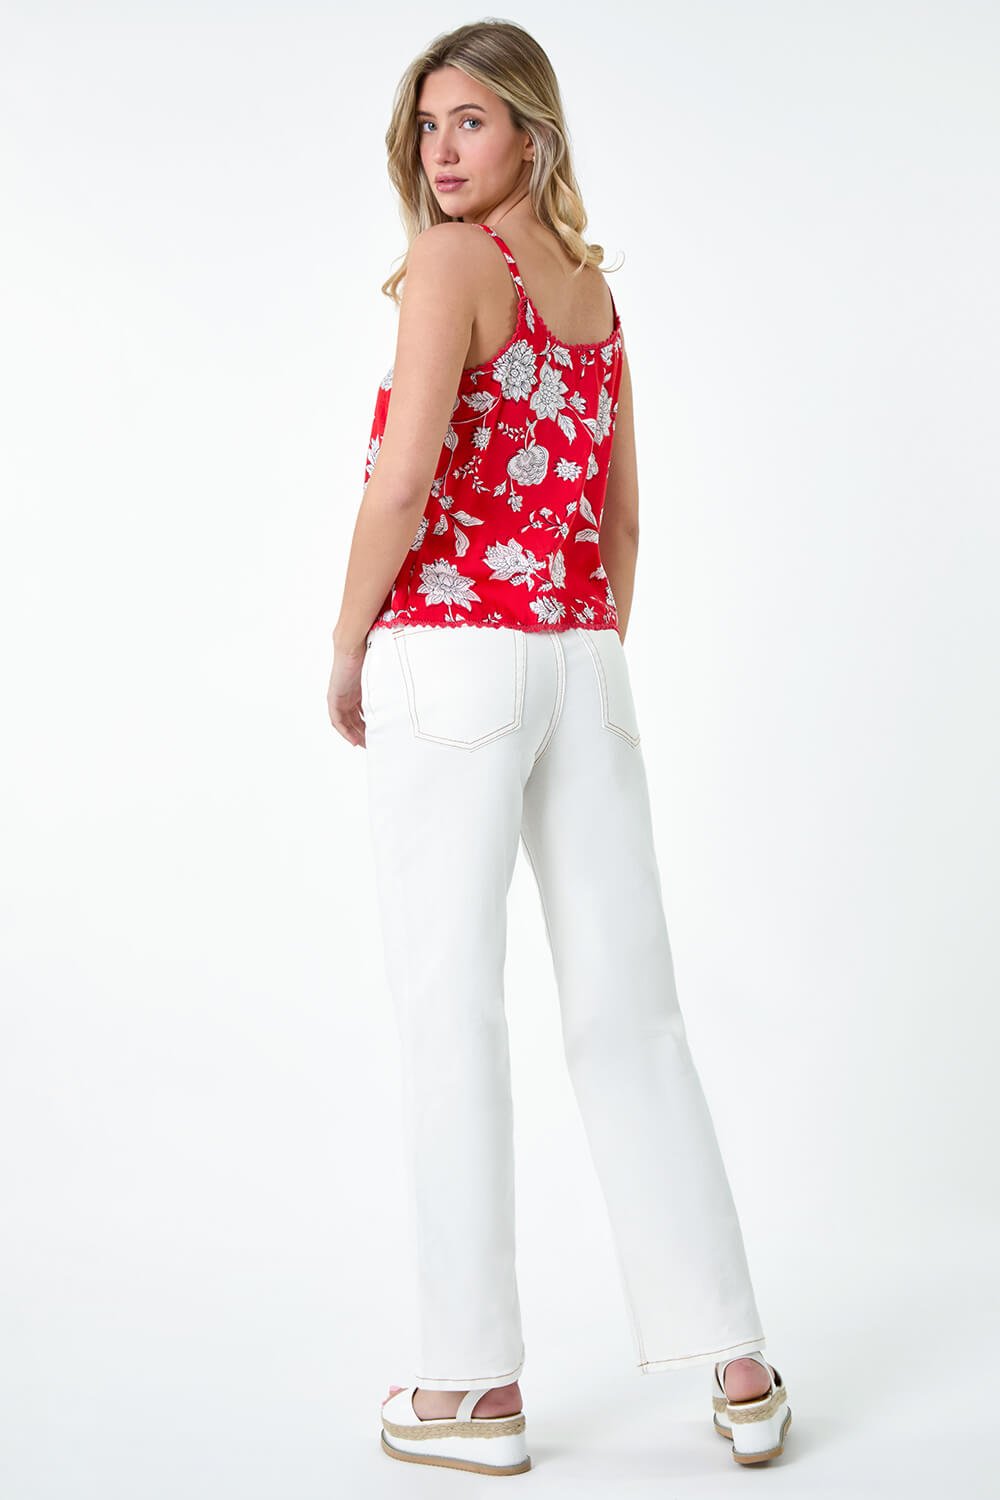 CORAL Ditsy Floral Lace Trim Top, Image 3 of 5